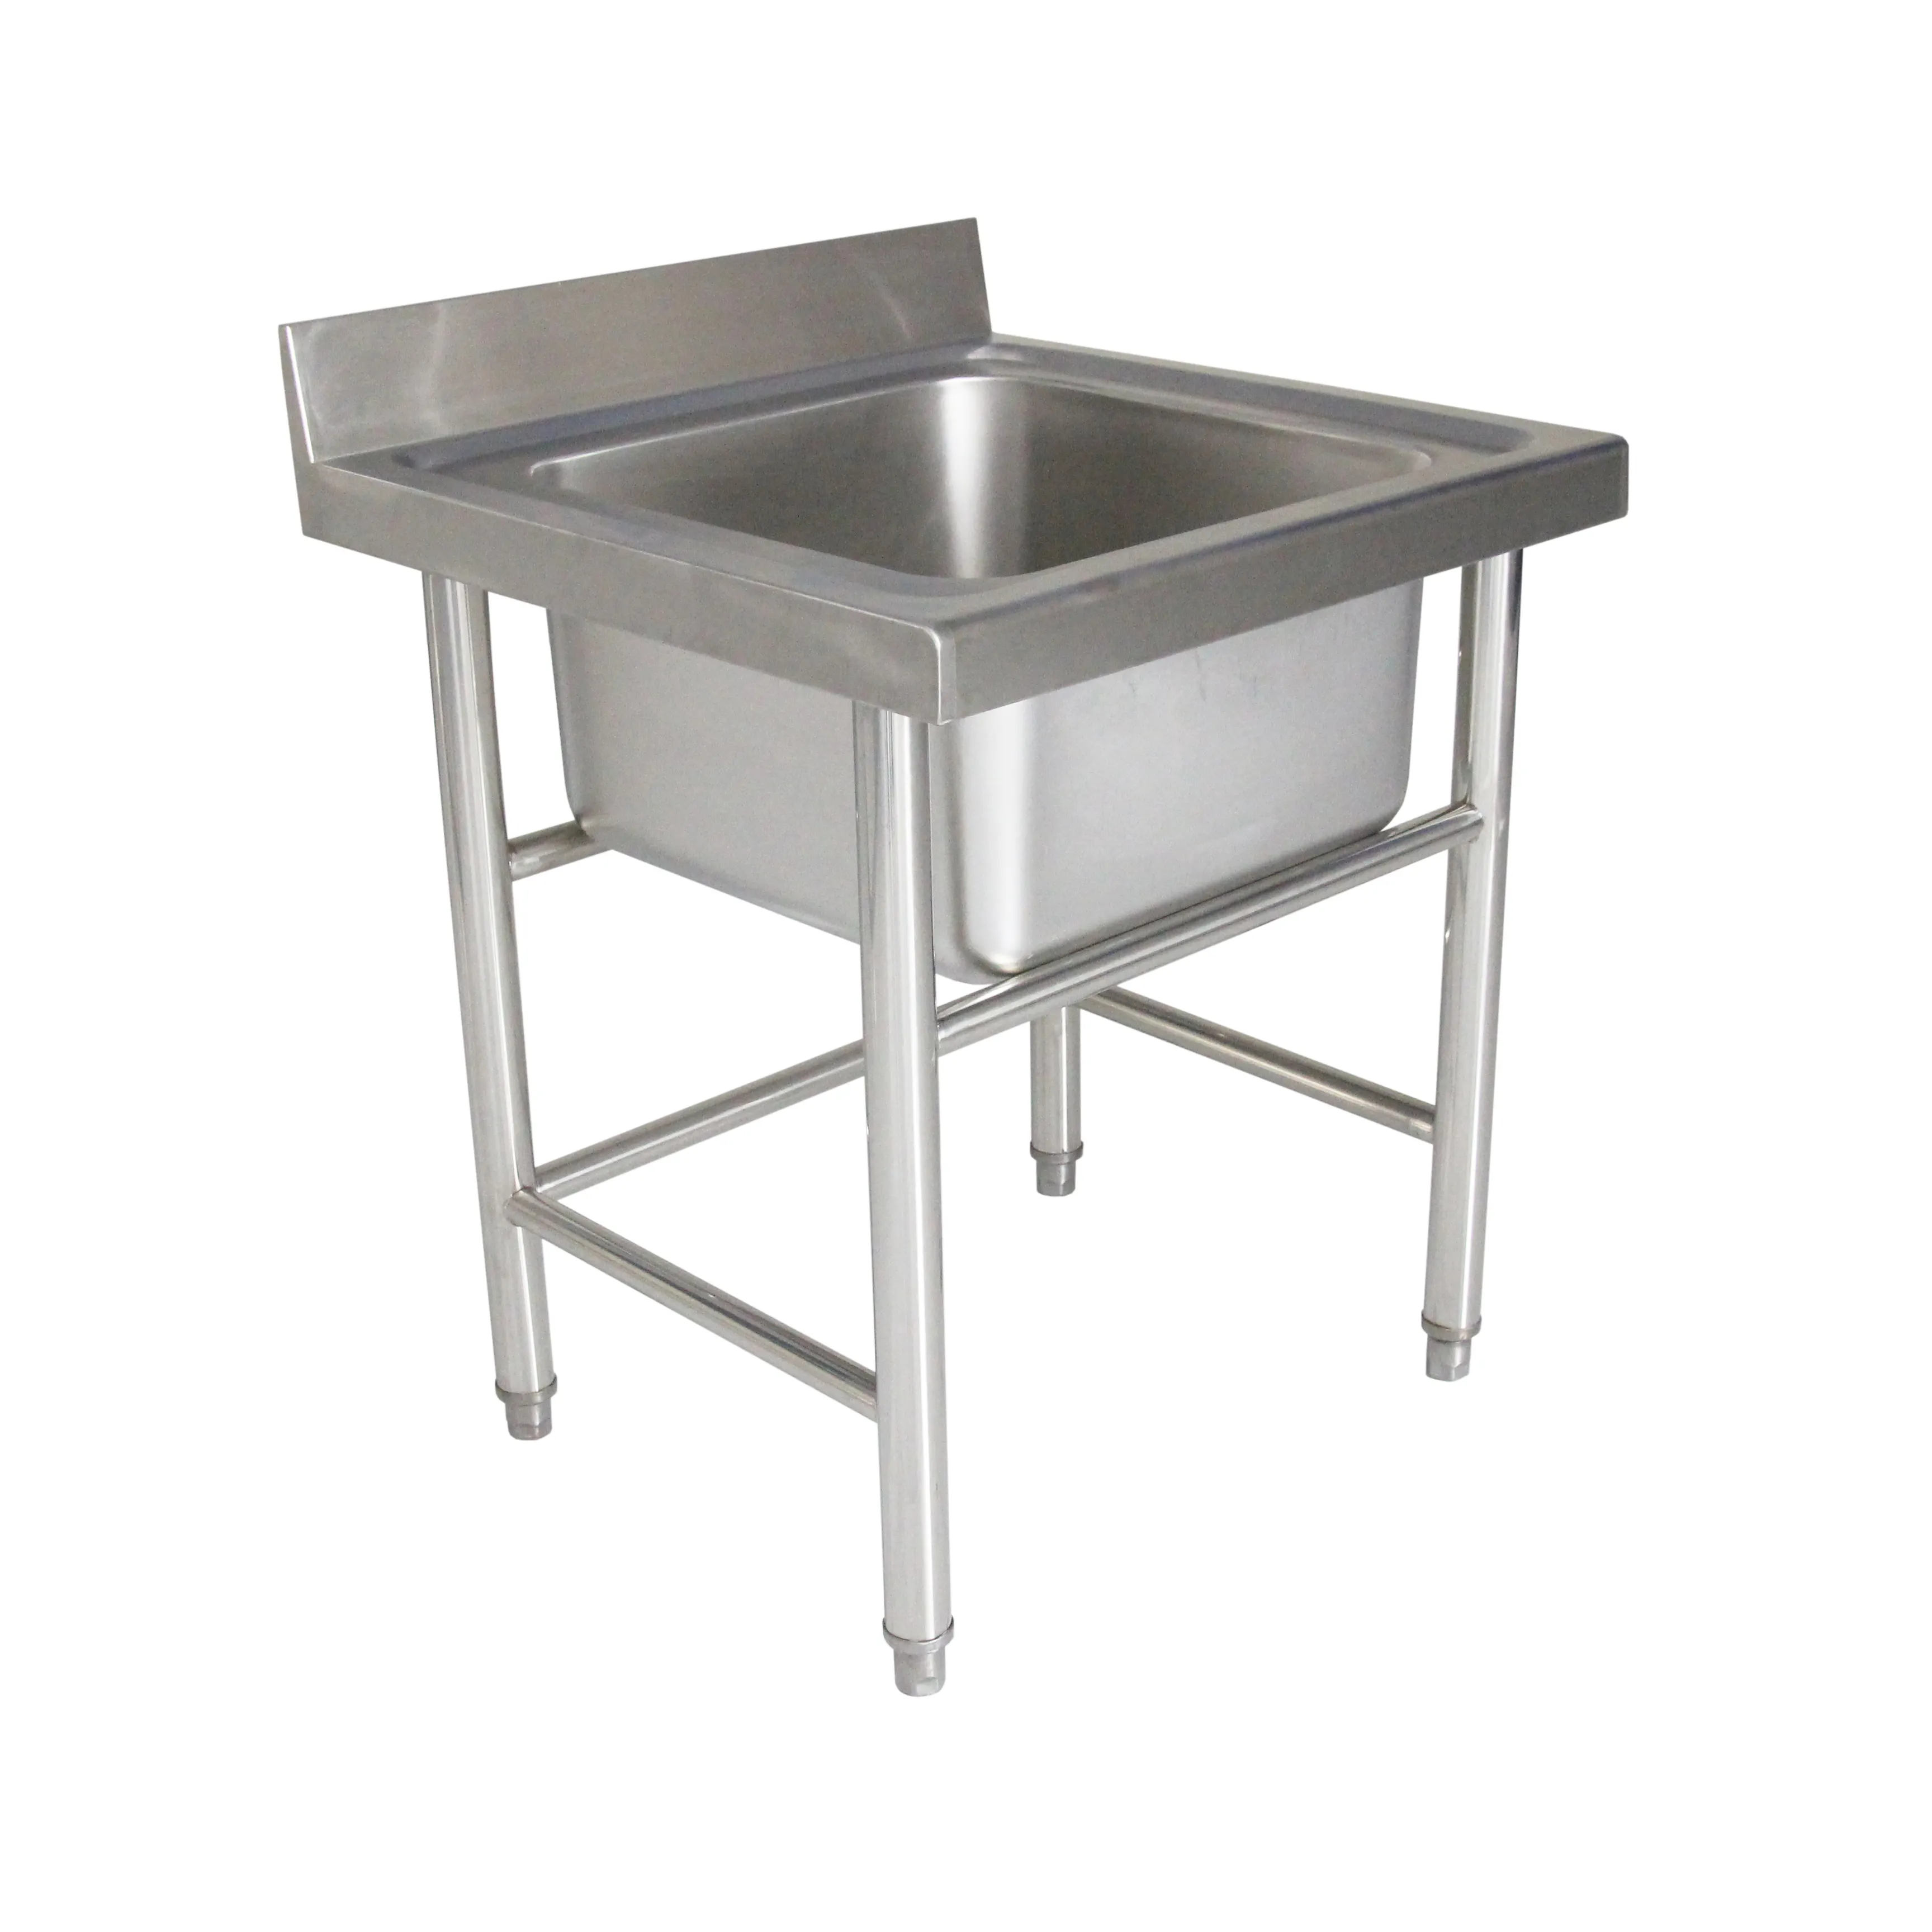 RUITAI Factory Direct Double bowl commercial stainless steel Kitchen Workstation Sink